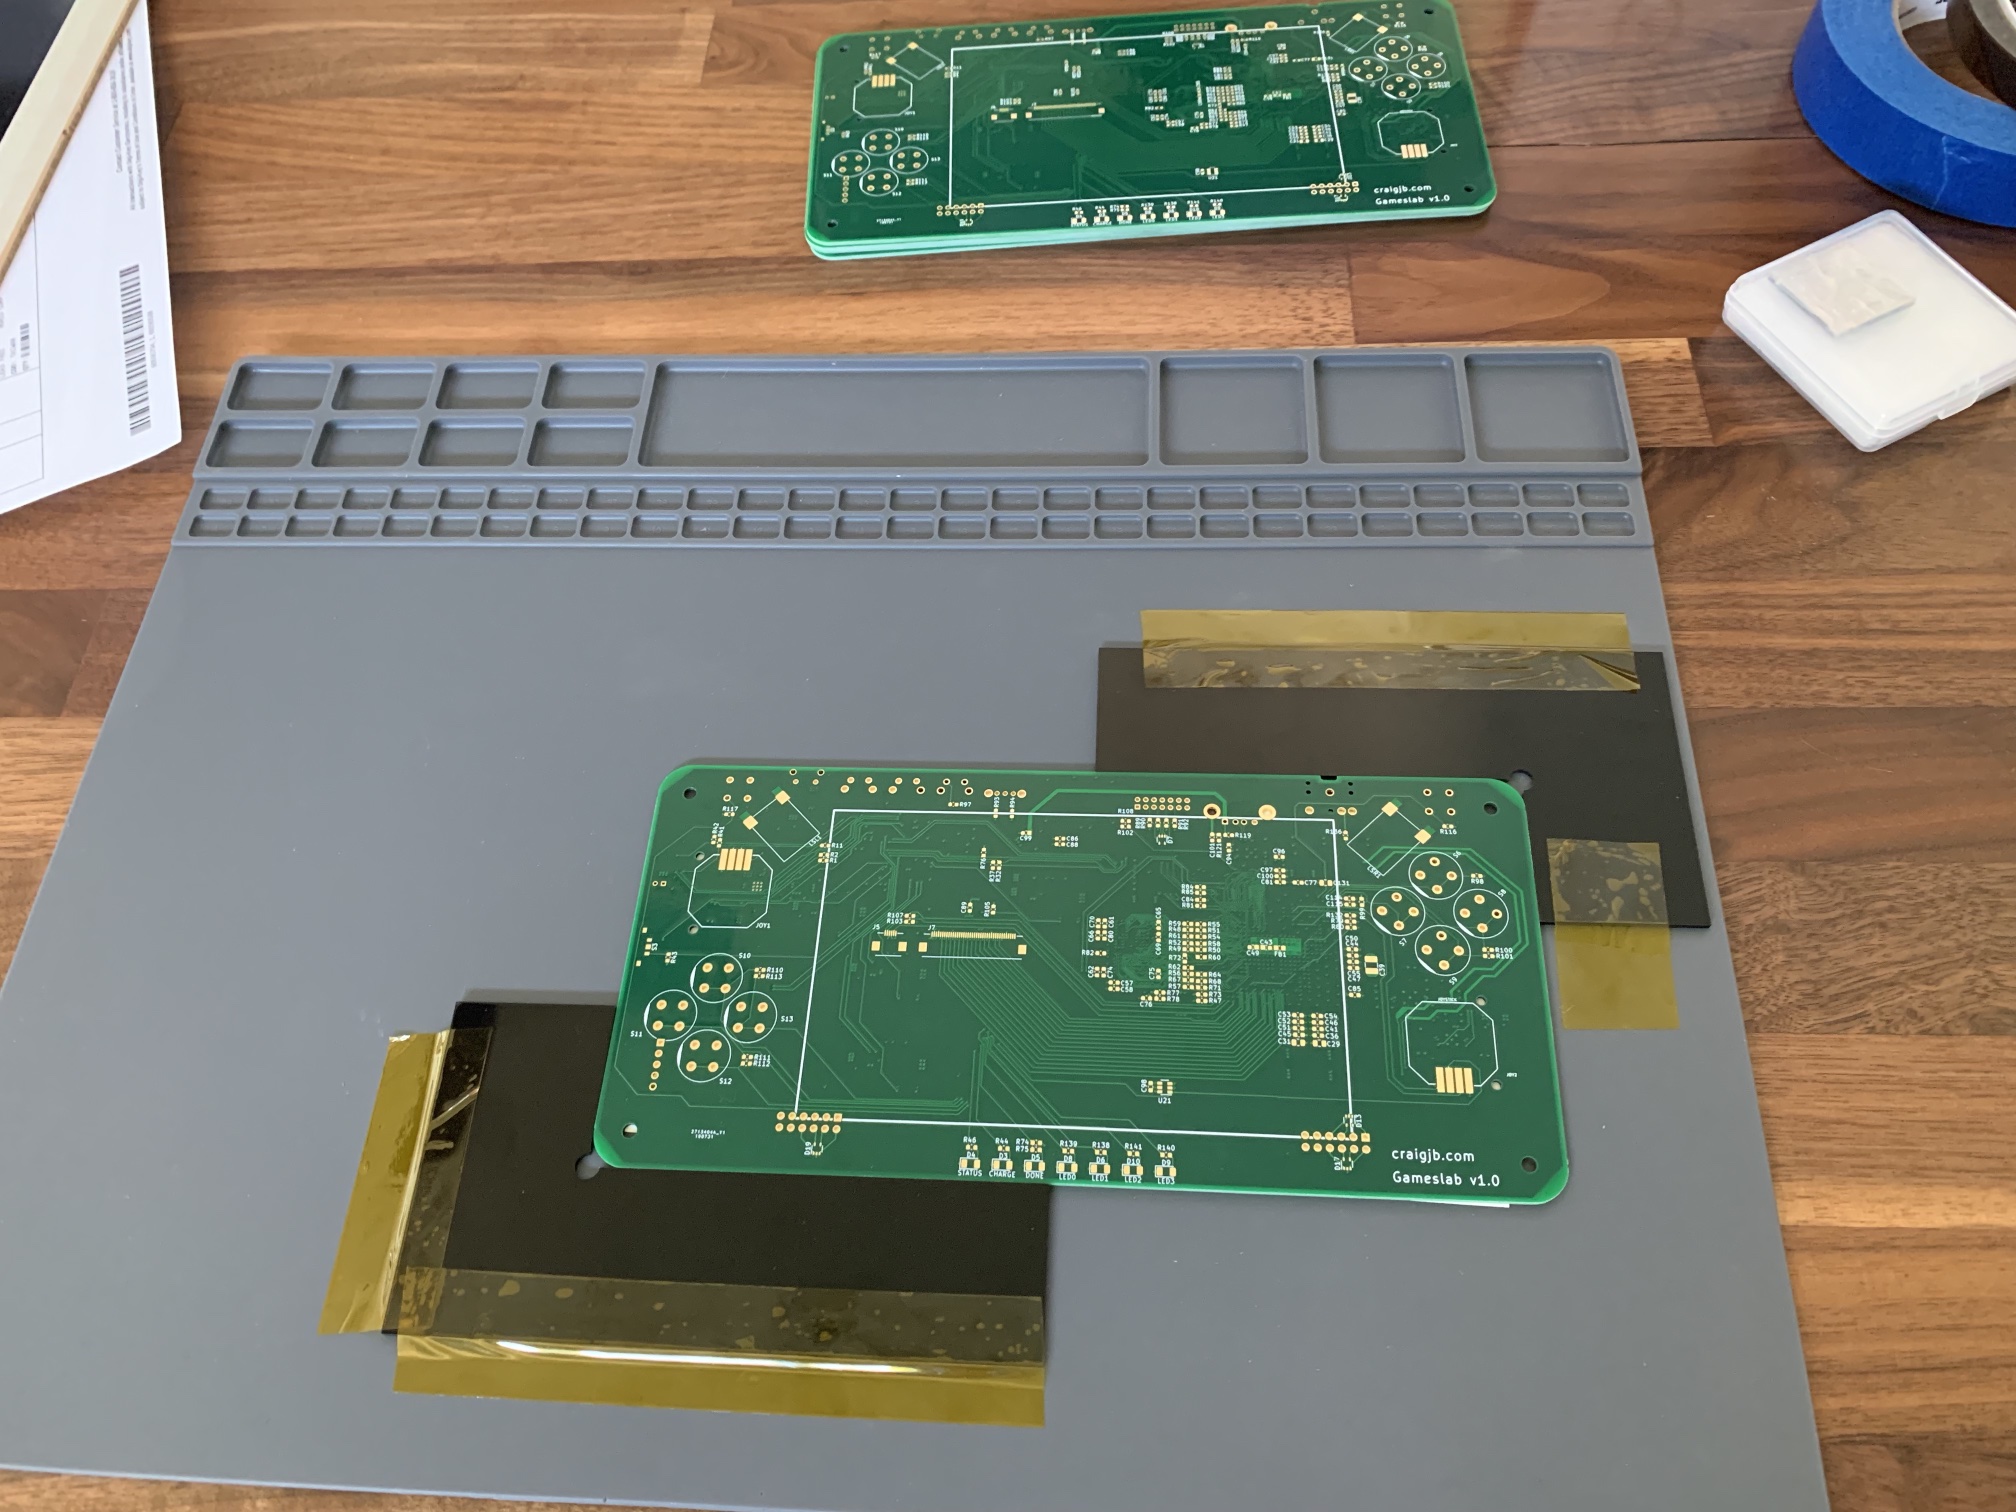 Taping the PCB in place before stenciling